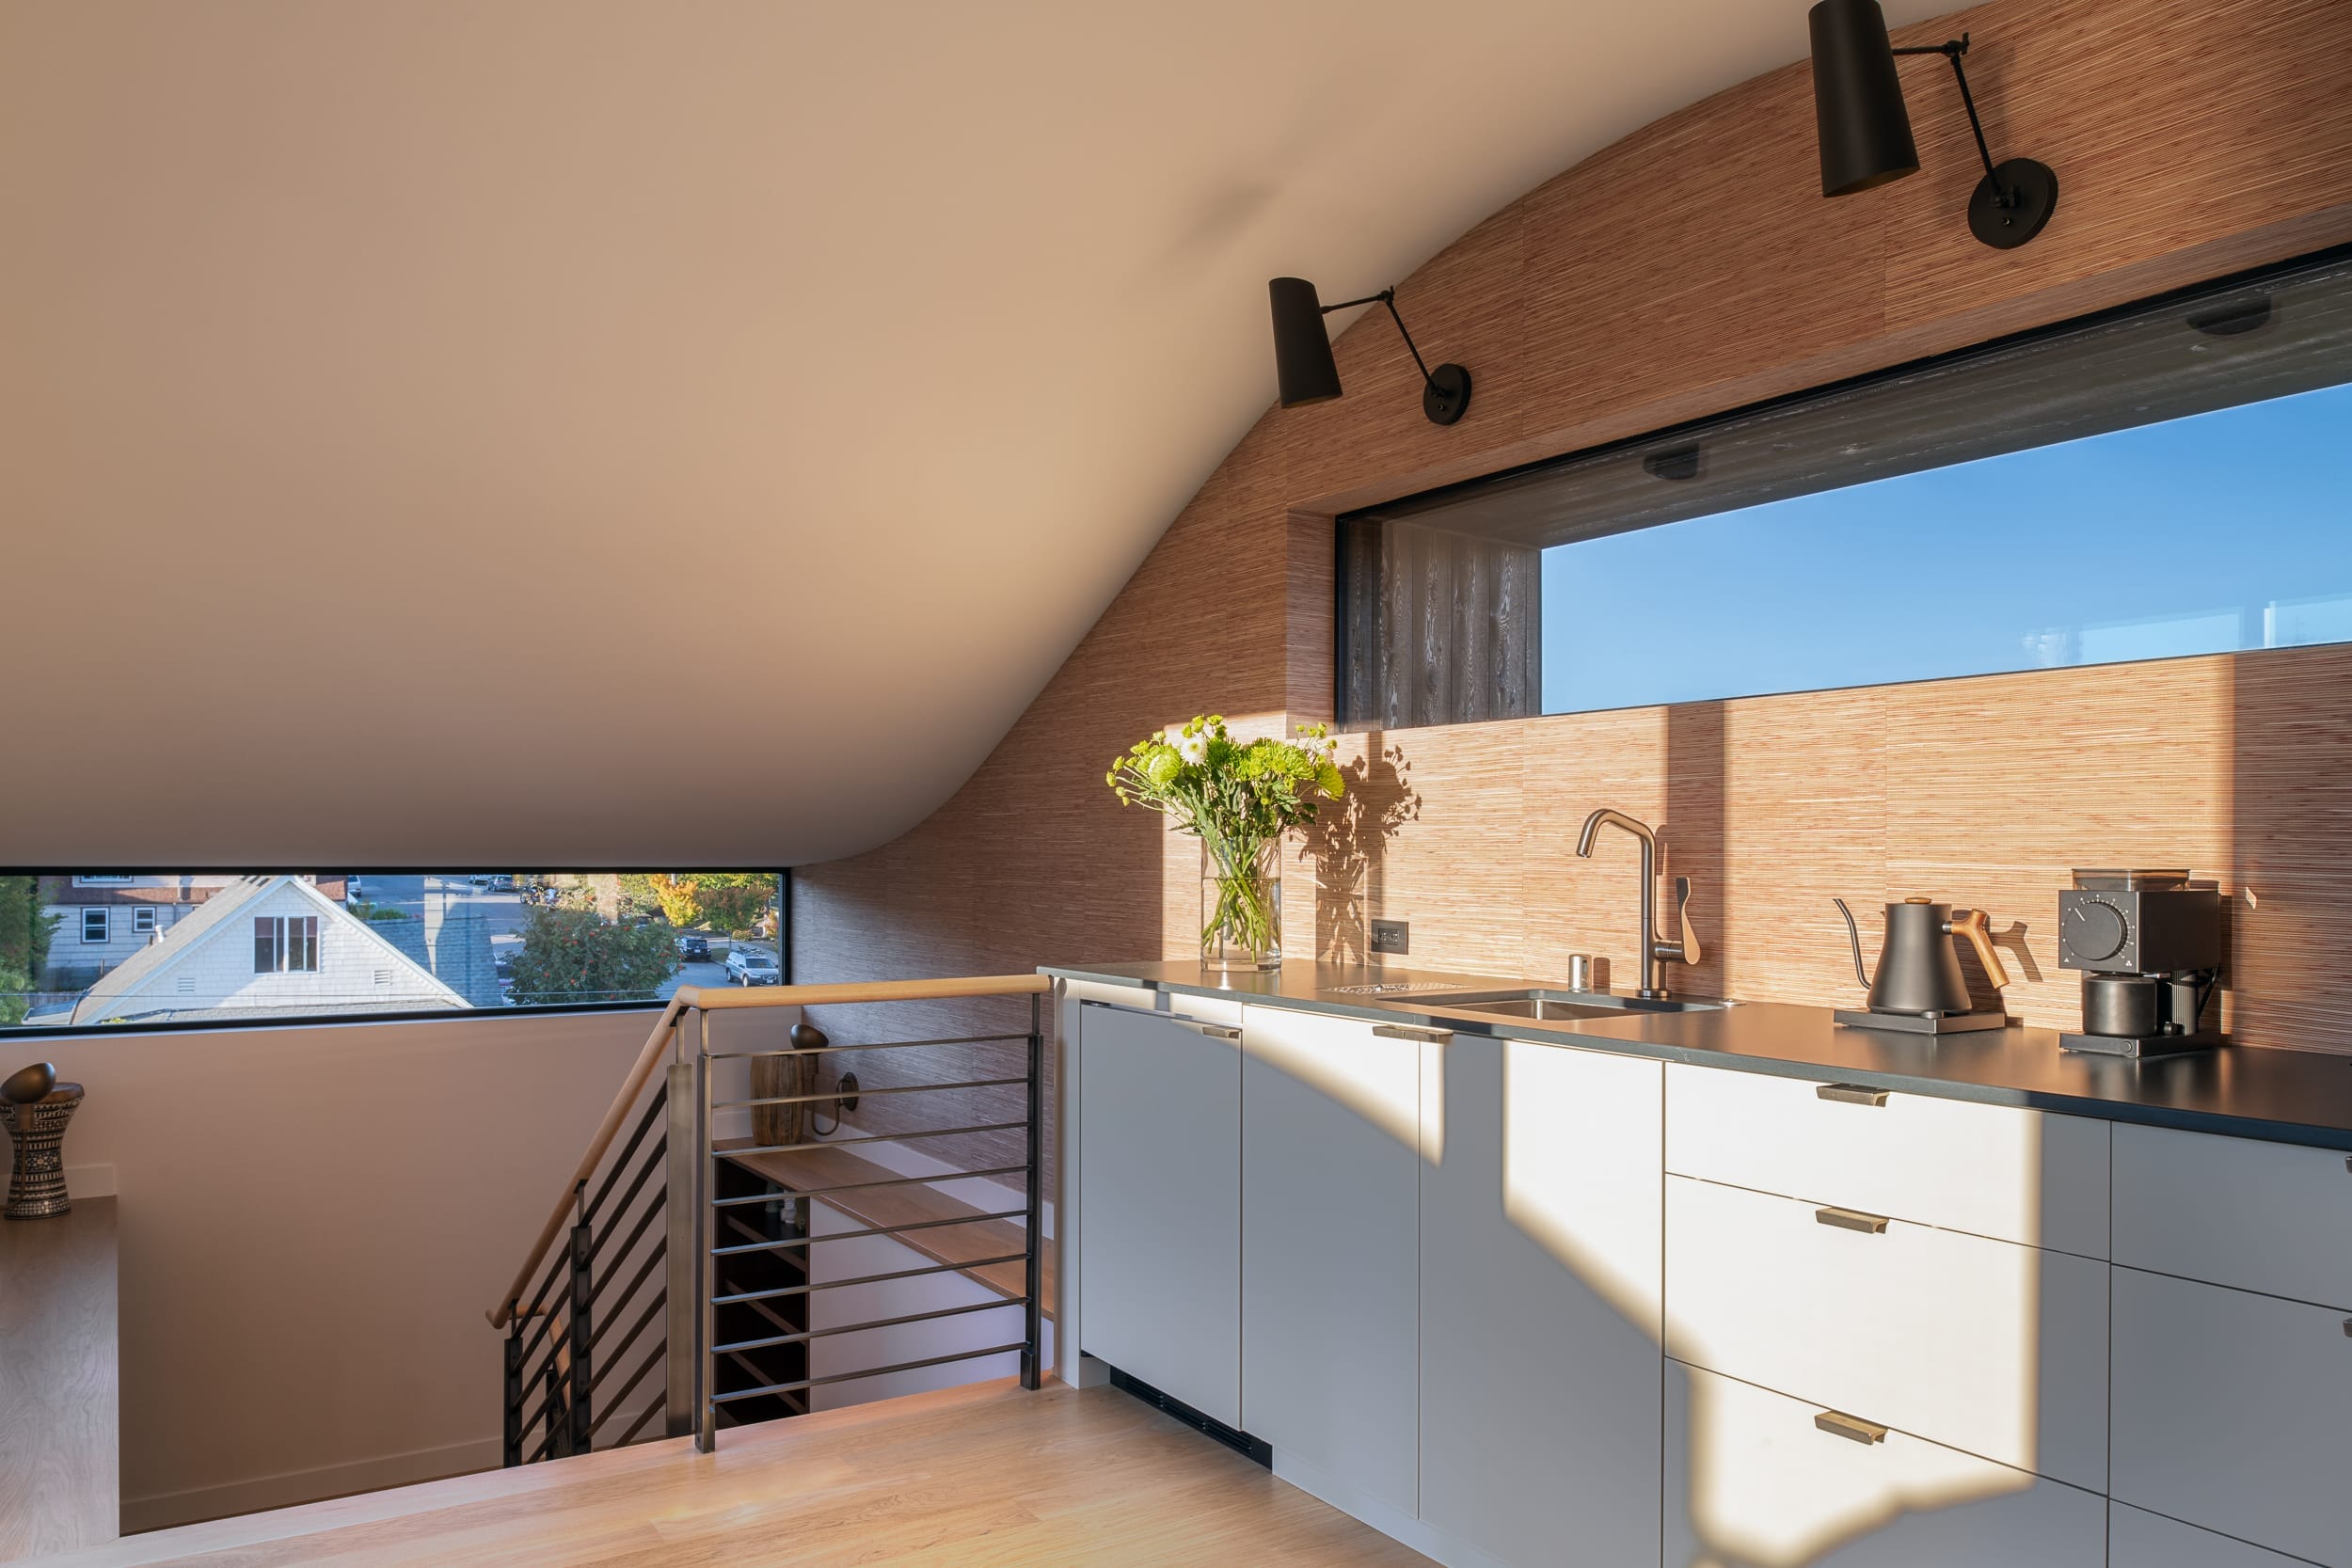 A kitchen in an attic with a view of the city.